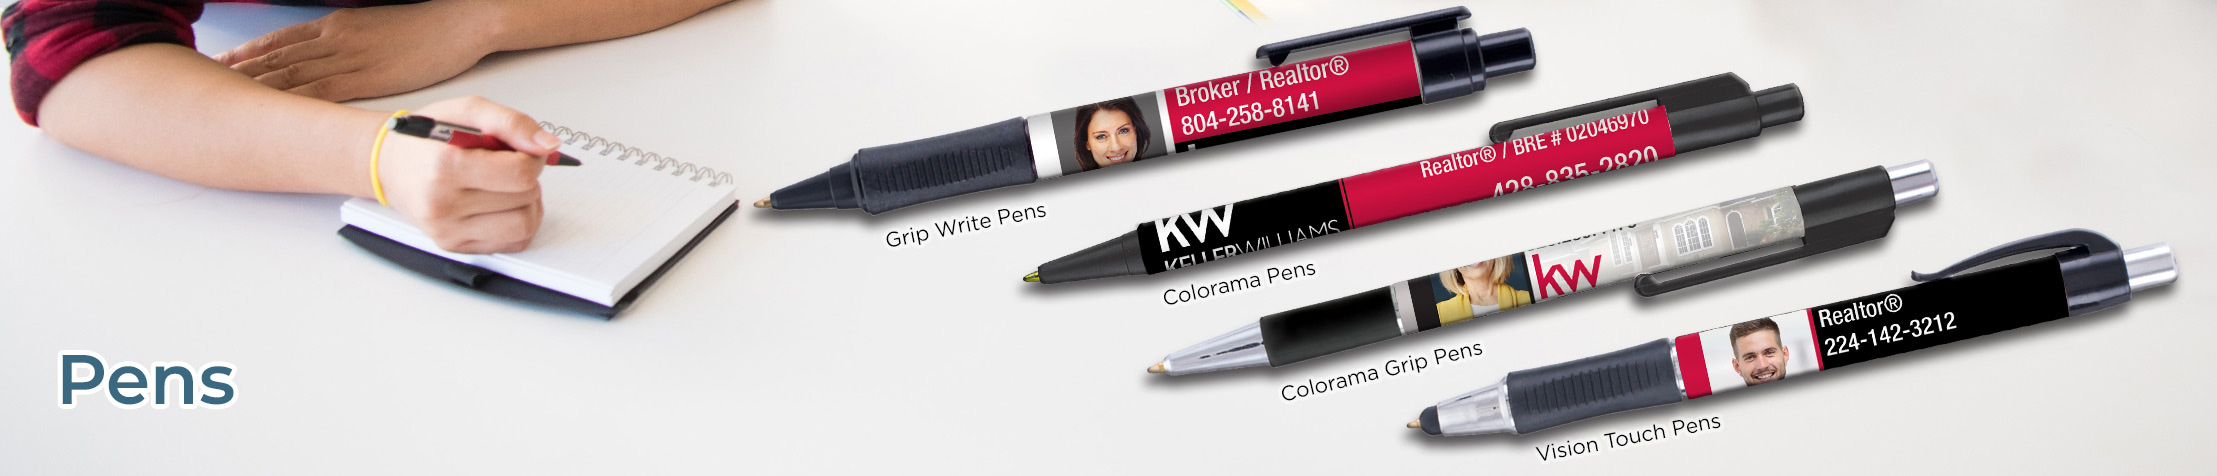 Keller Williams Real Estate Personalized Pens - KW approved vendor promotional products: Grip Write Pens, Colorama Pens, Vision Touch Pens, and Colorama Grip Pens | BestPrintBuy.com